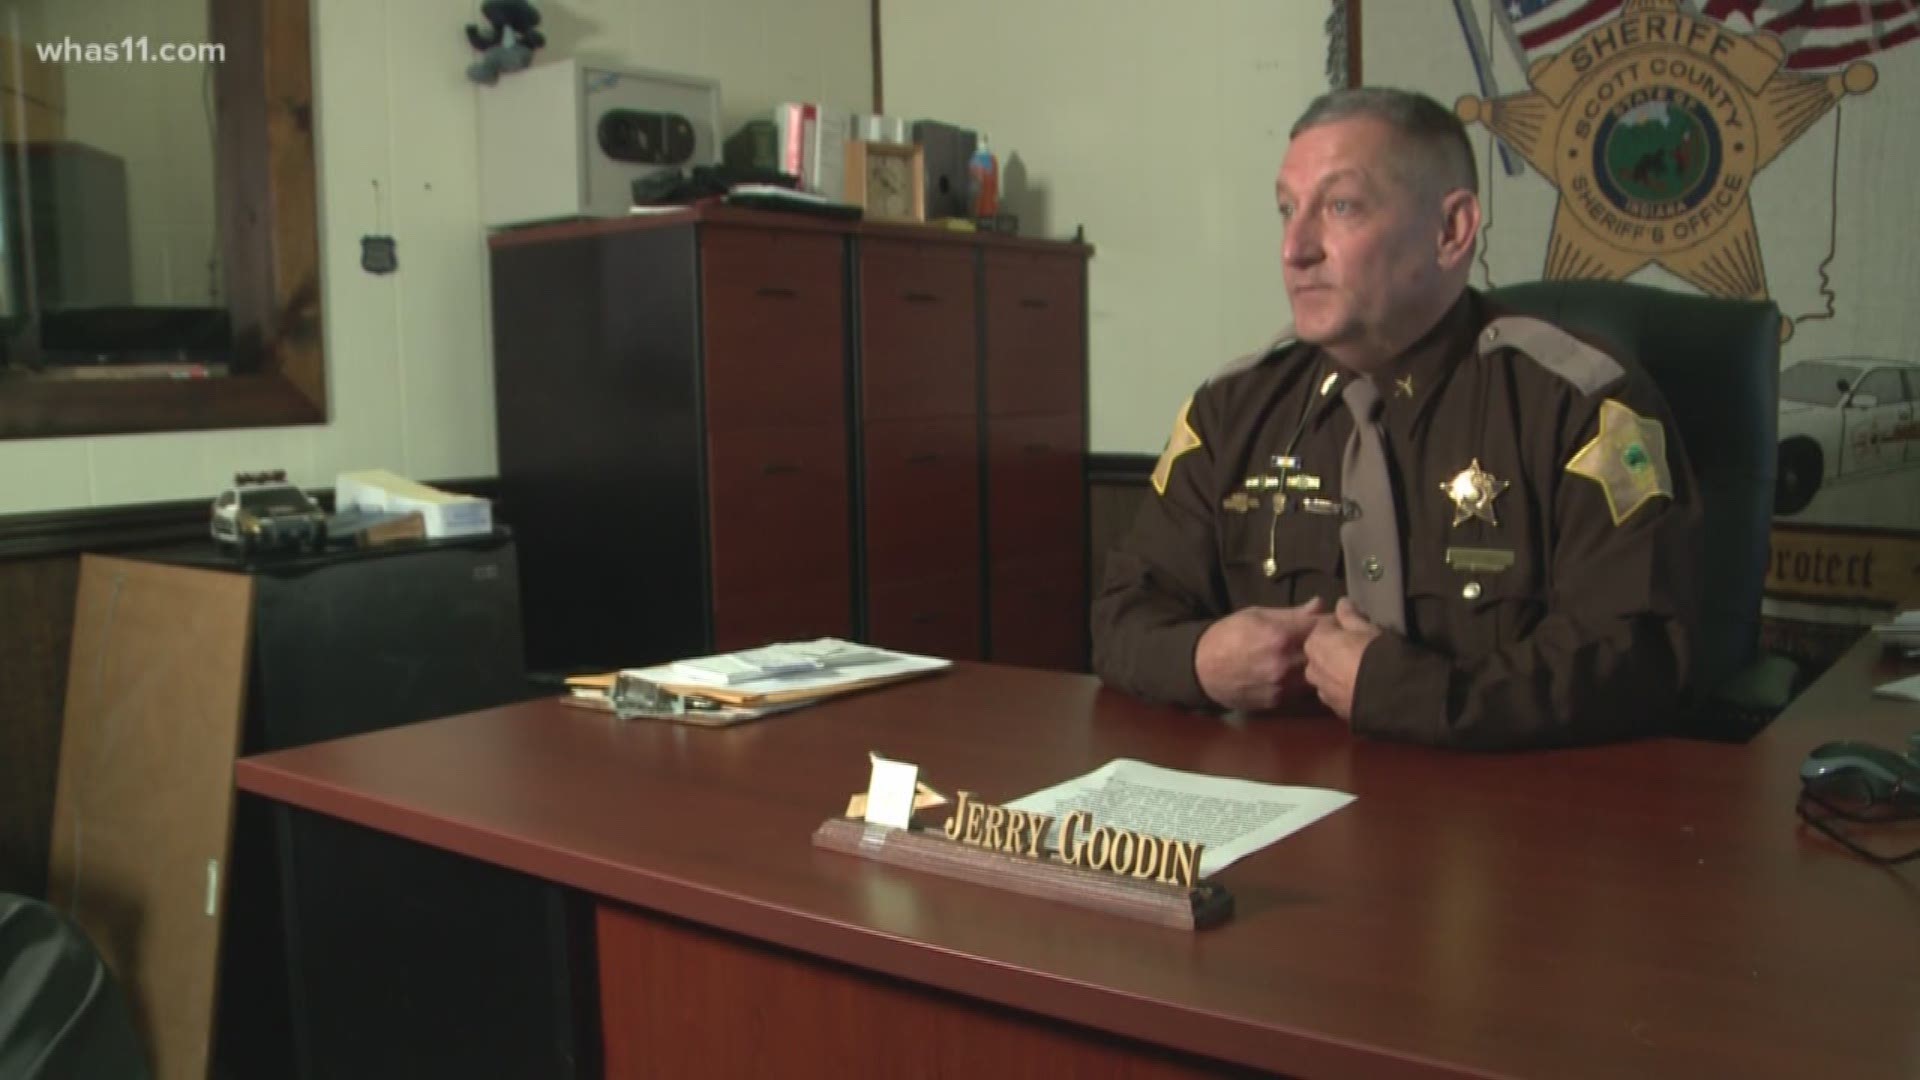 Sheriff Goodin has declared the county a drug-free zone.